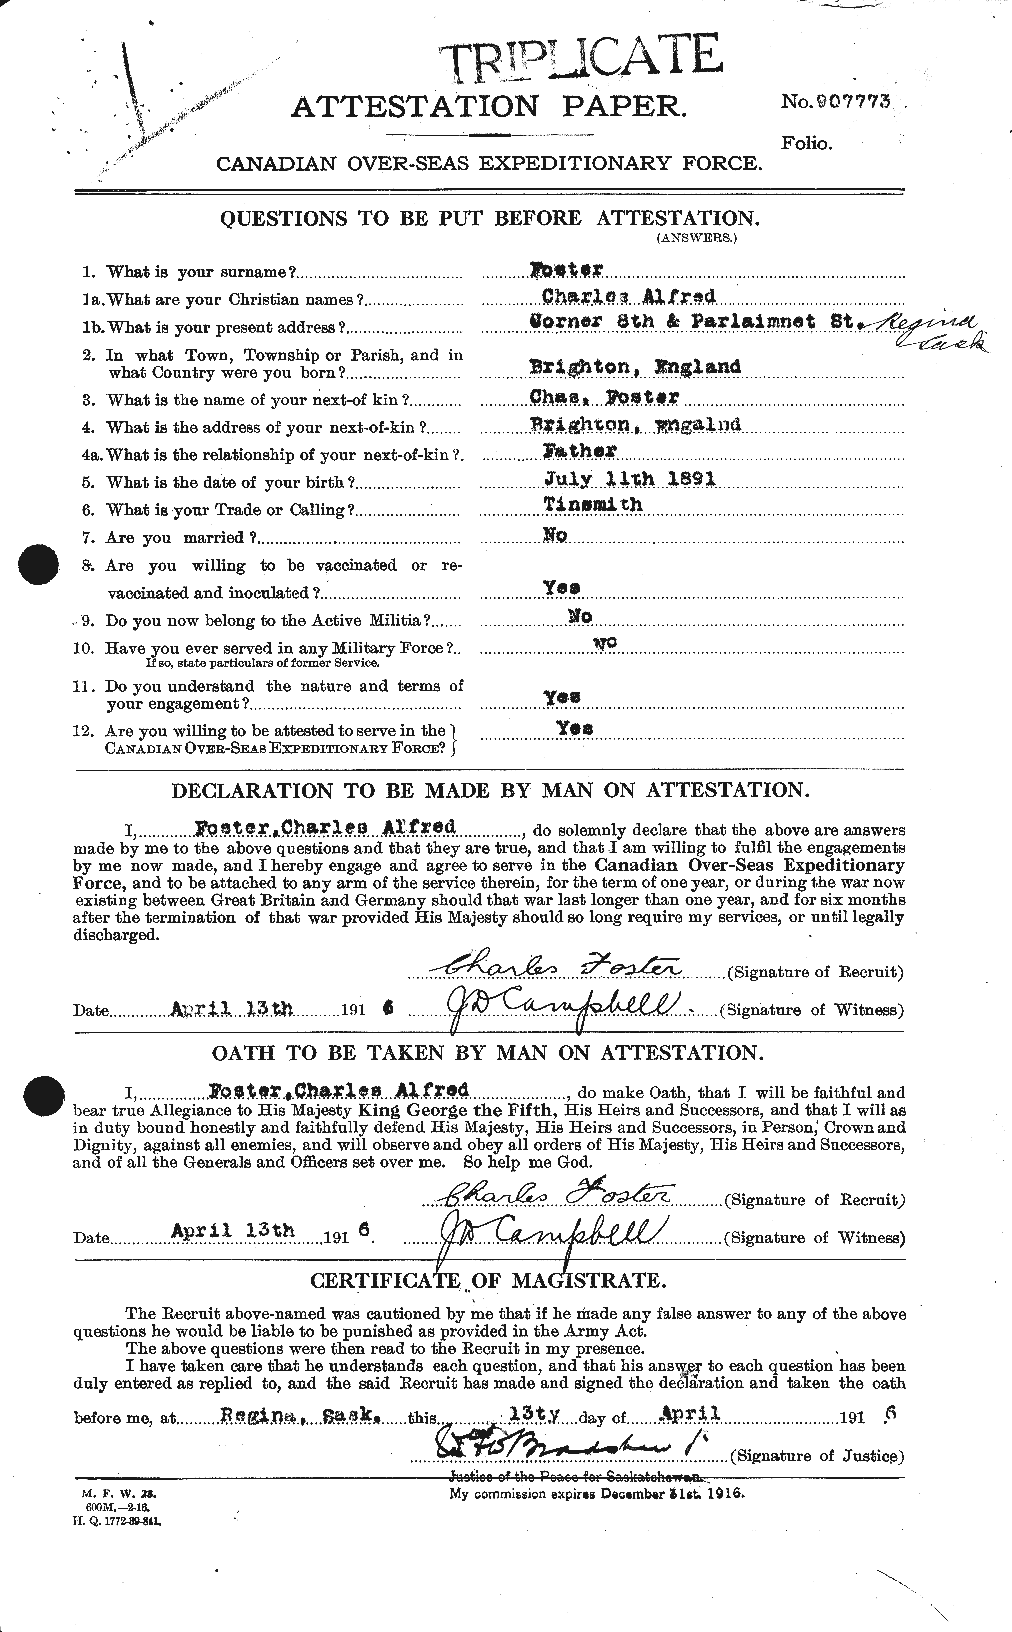 Personnel Records of the First World War - CEF 330505a